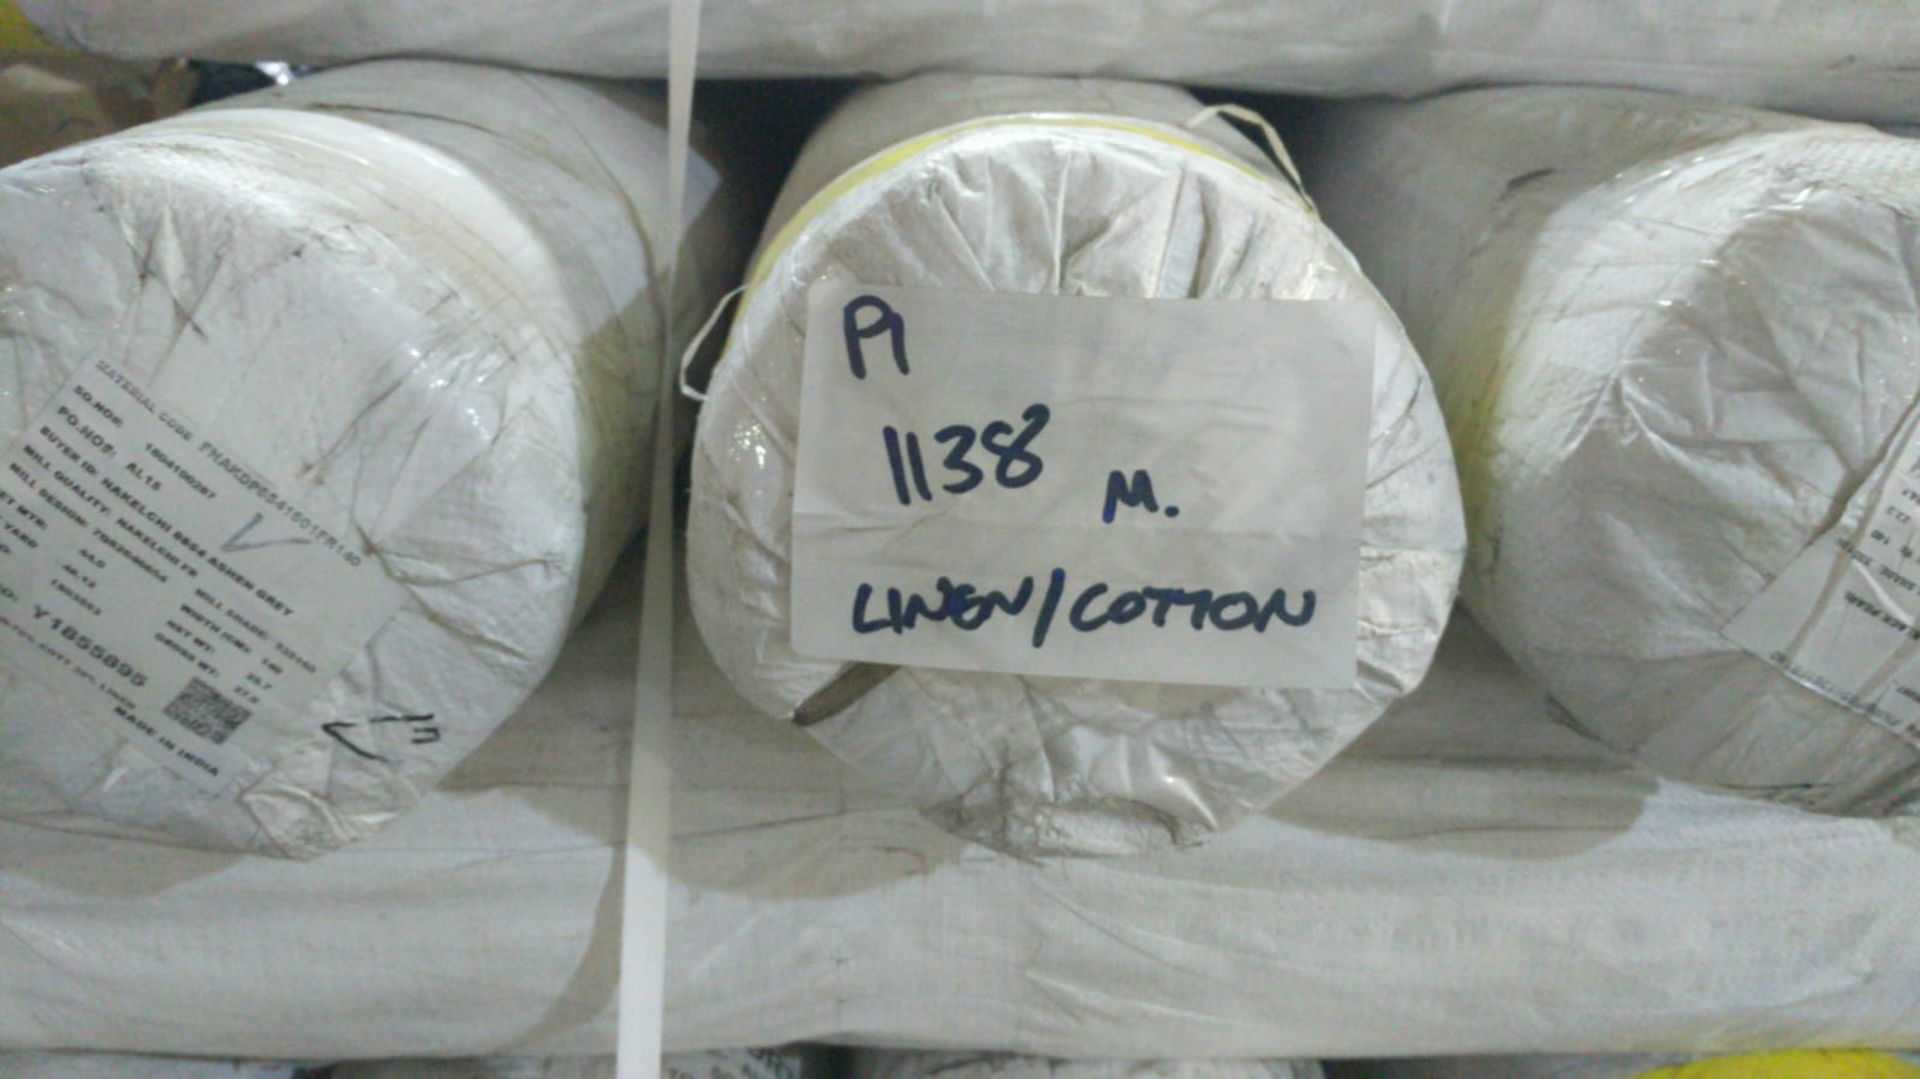 1 x Pallet of Swoon textile to contain 27 Rolls of Linnen / Cotton Textile - Appx 1100 Metres - Image 2 of 2